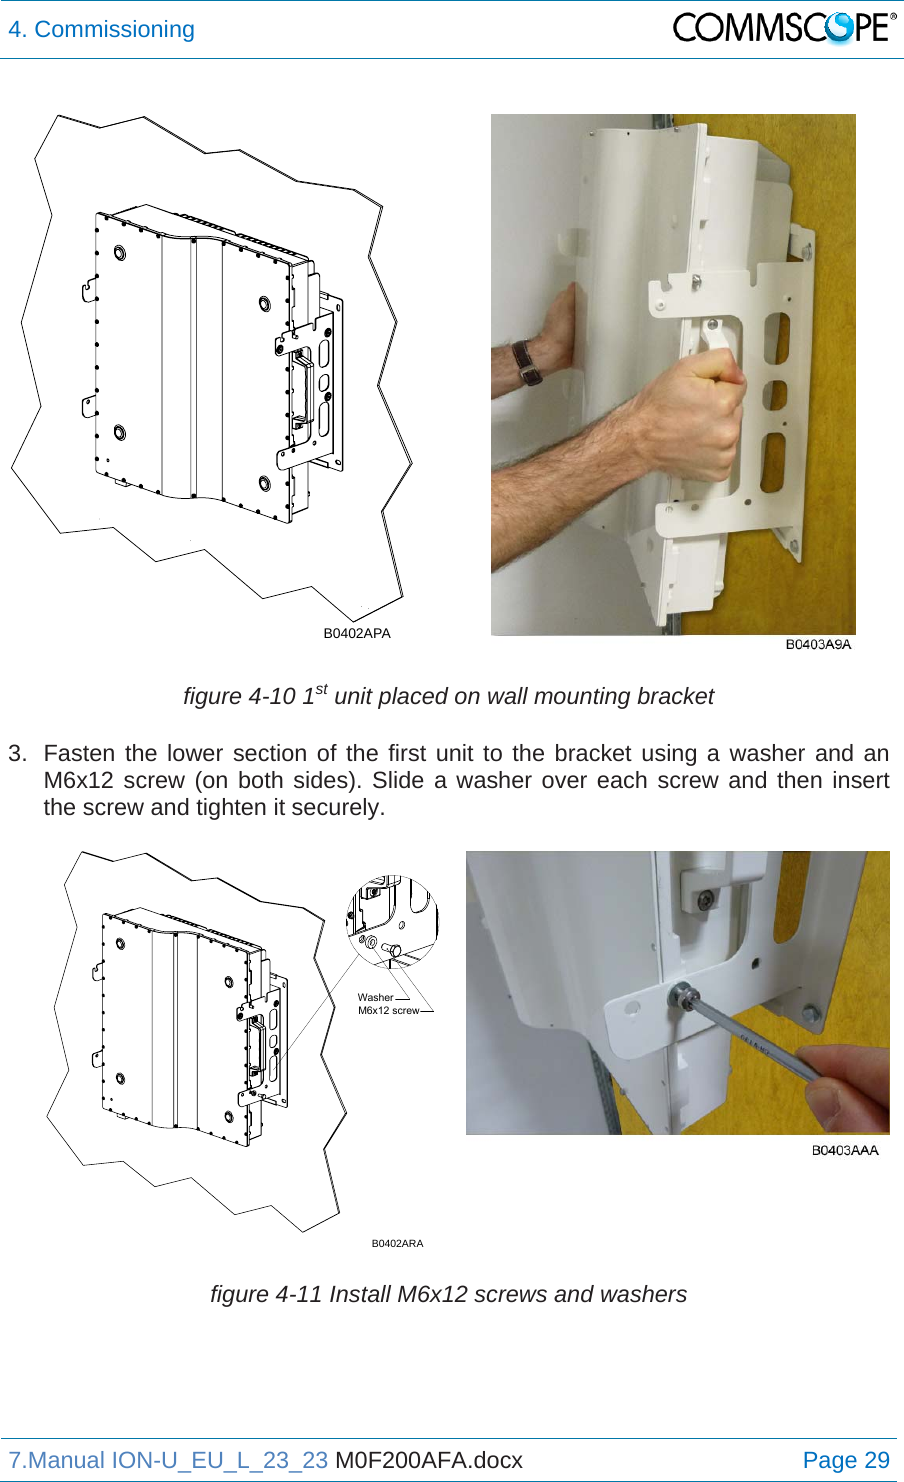 4. Commissioning  7.Manual ION-U_EU_L_23_23 M0F200AFA.docx Page 29  figure 4-10 1st unit placed on wall mounting bracket 3.  Fasten the lower section of the first unit to the bracket using a washer and an M6x12 screw (on both sides). Slide a washer over each screw and then insert the screw and tighten it securely.  figure 4-11 Install M6x12 screws and washers  B0402APAM6x12 screwWasherB0402ARA